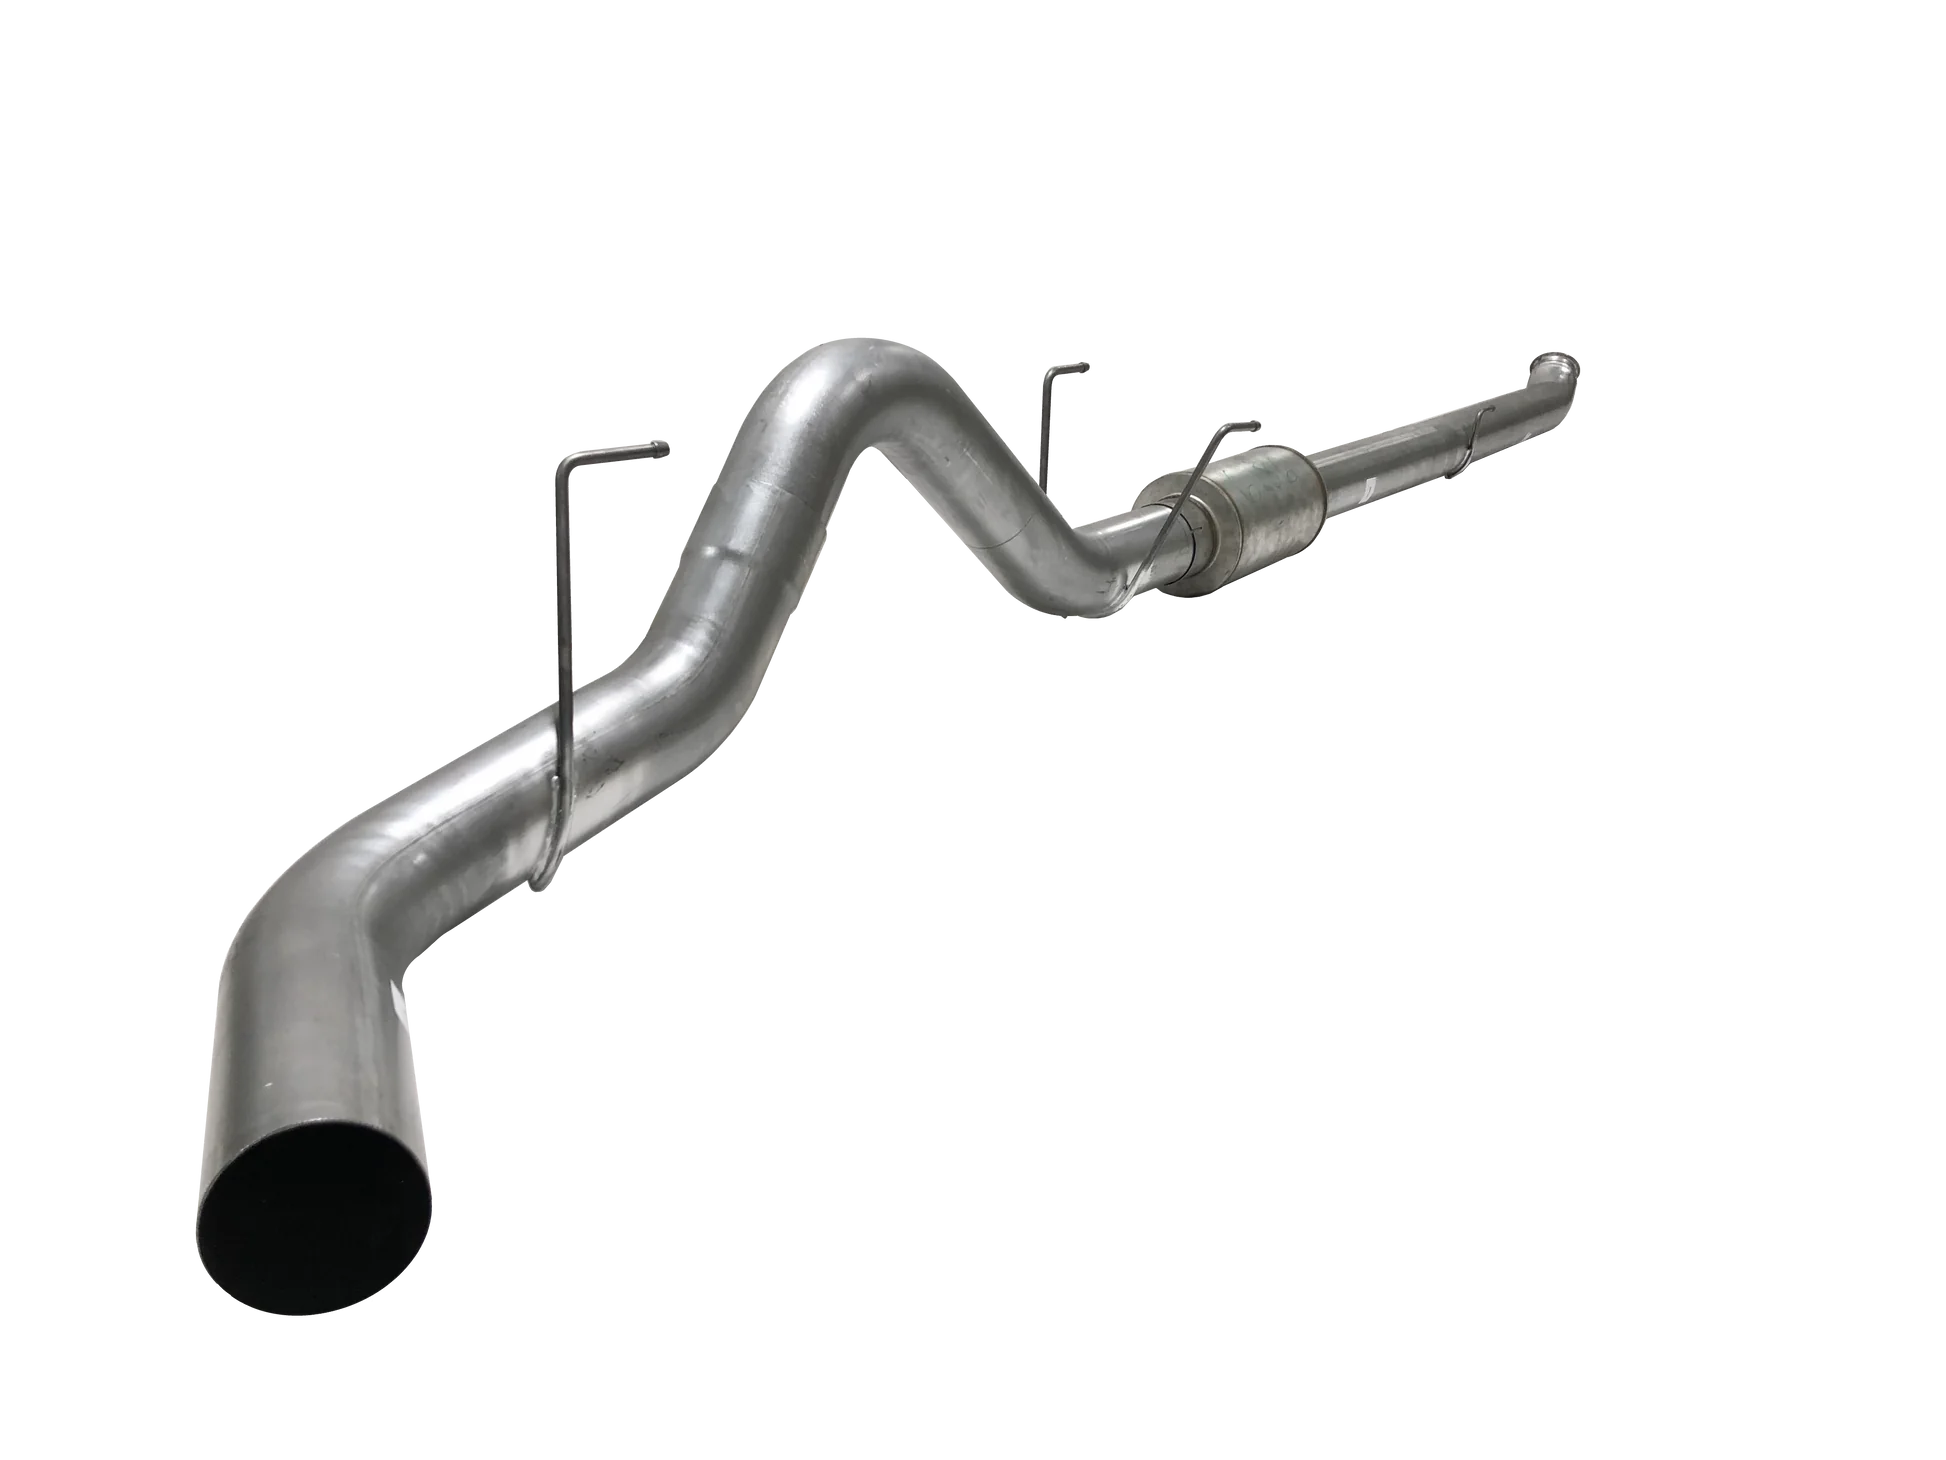 511017 511018 512014 512015 Mel's Manufacturing 5" Flex Pipe Back Single | 2019+ Ram 3500 6.7L Cummins  Mels Mfg FloPro Flo-Pro Flo Pro Hell On Wheels Performance Ltd Limited Canadian Owned and Operated Online Diesel Parts Distribution & Wholesale Supply Center in Alberta Canada Shipping Supplying to Alberta British Columbia Sask Saskatchewan Manitoba Ontario Quebec Newfoundland Labrador New Brunswick Nova Scotia Prince Edward Island AB BC SK MB ON QC PQ NS NB NFLD N.L. PEI